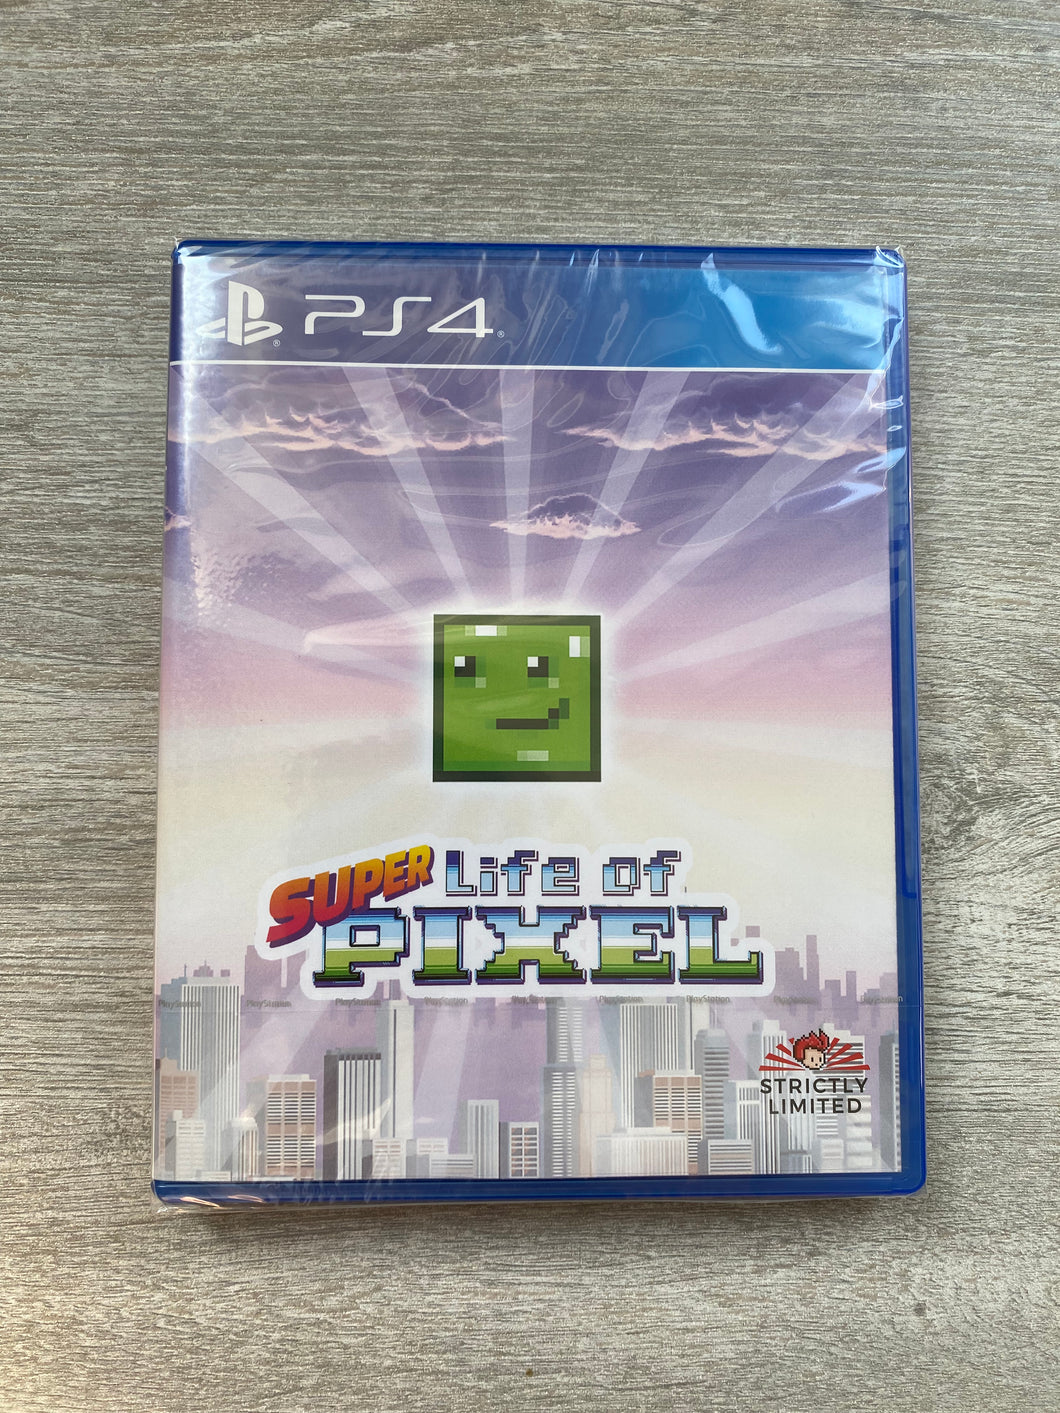 Super life of pixel / Strictly limited games / PS4 / 1000 copies